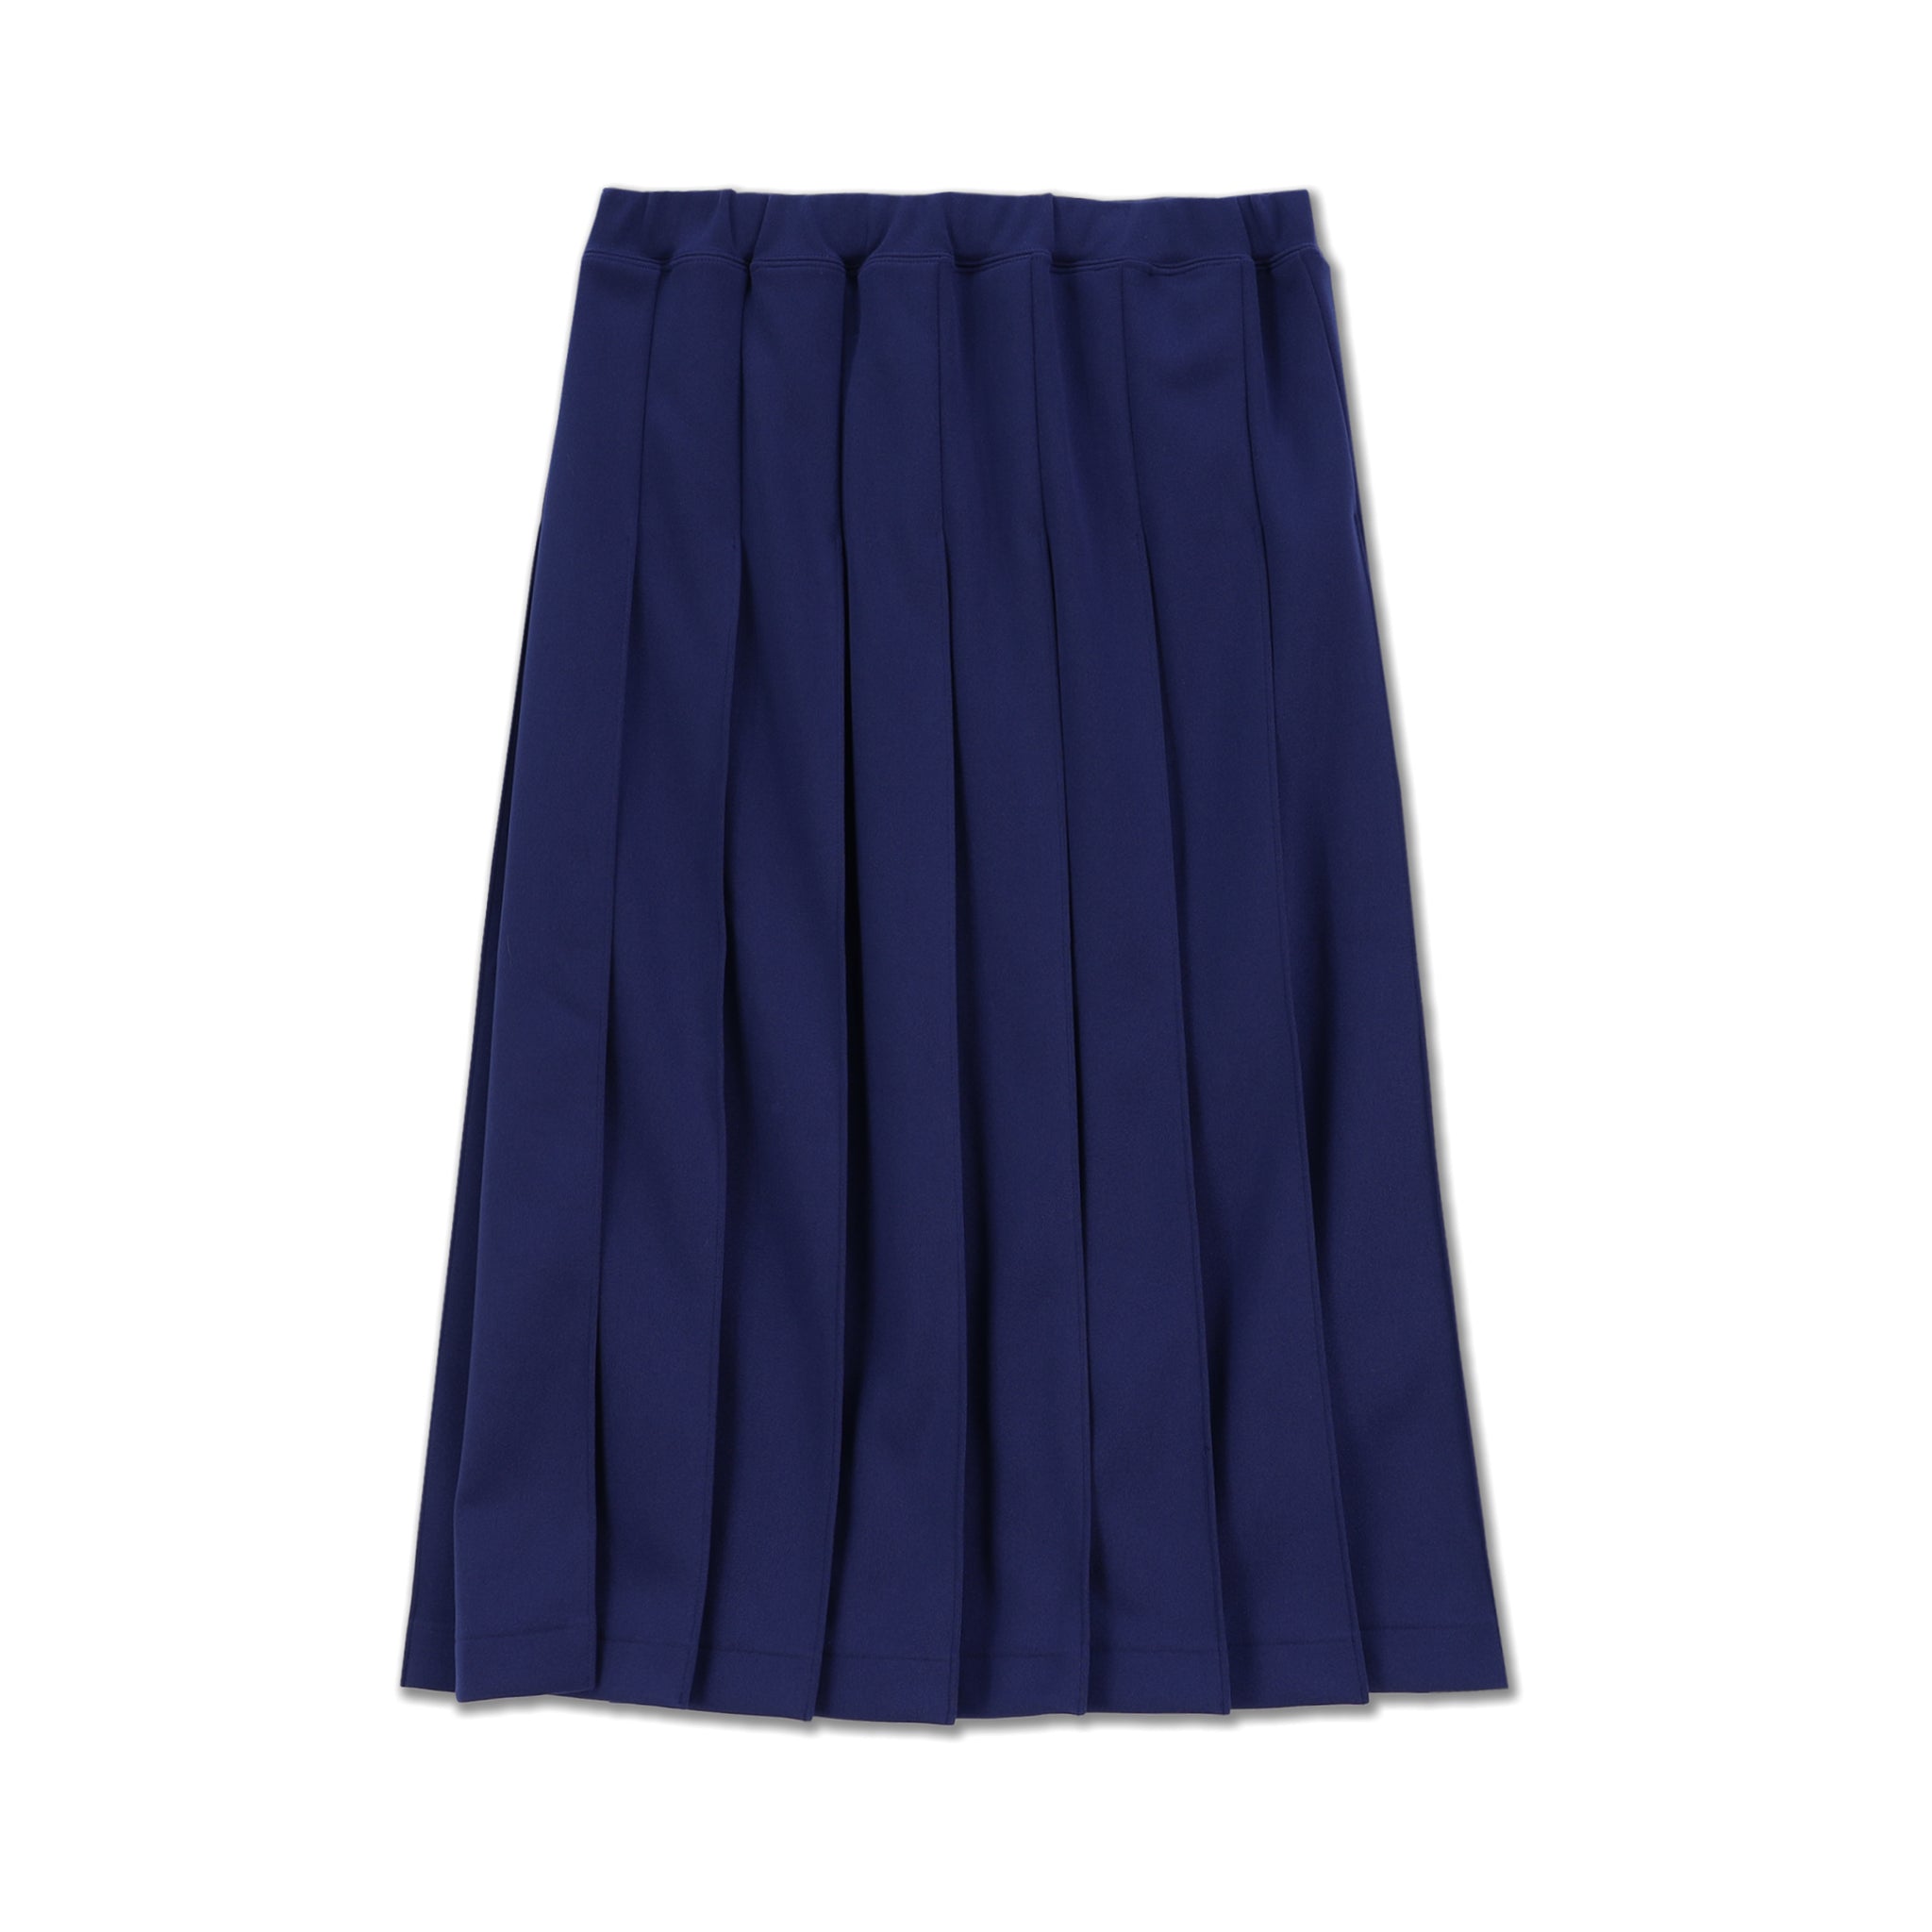 Polyester Jersey Pleated Skirt Navy